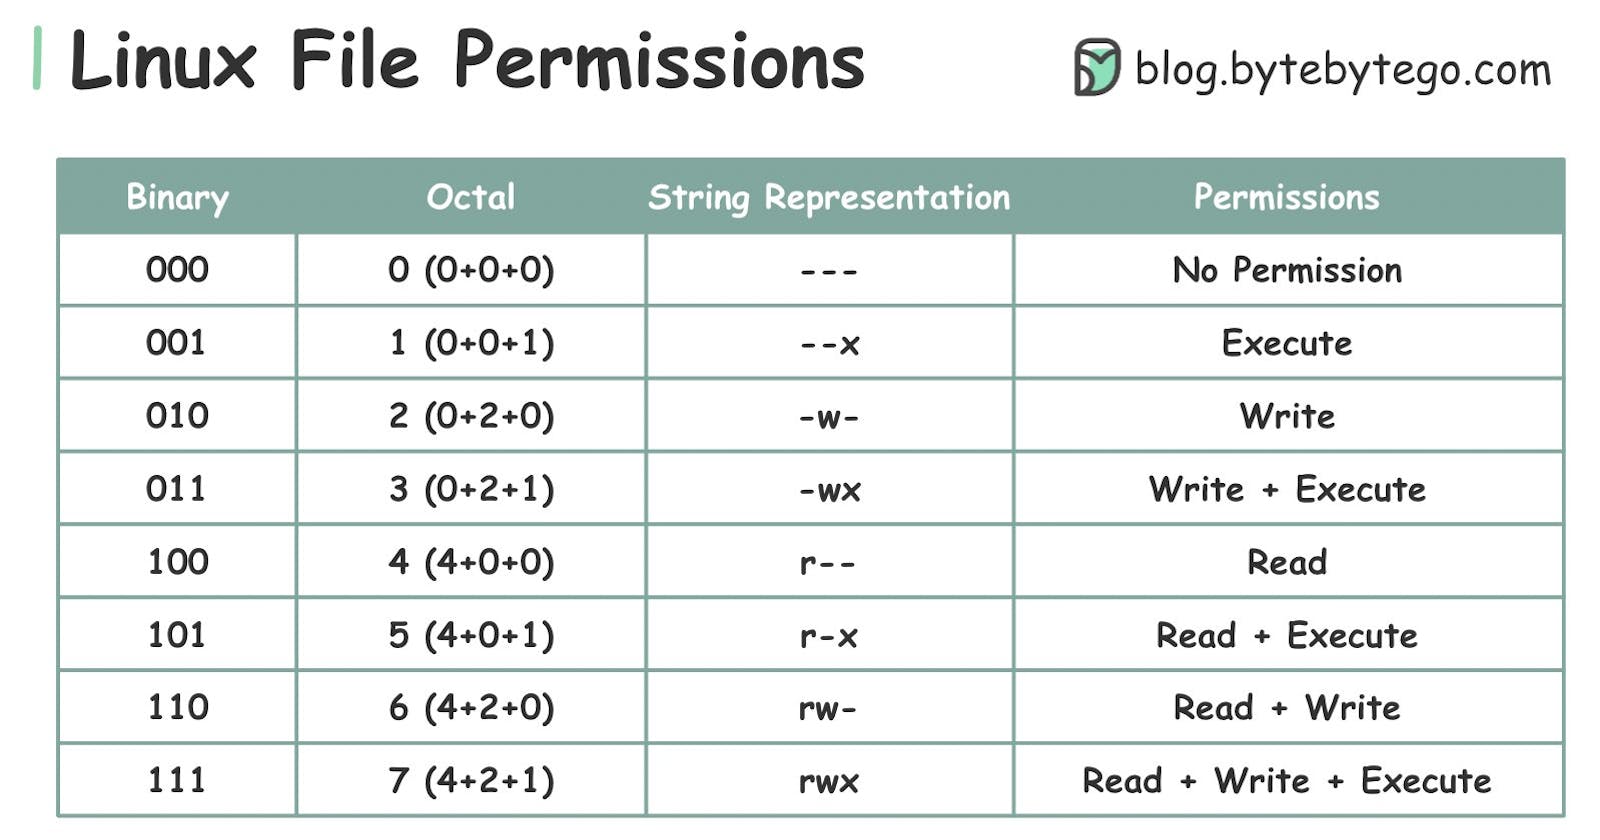 File permissions in Linux